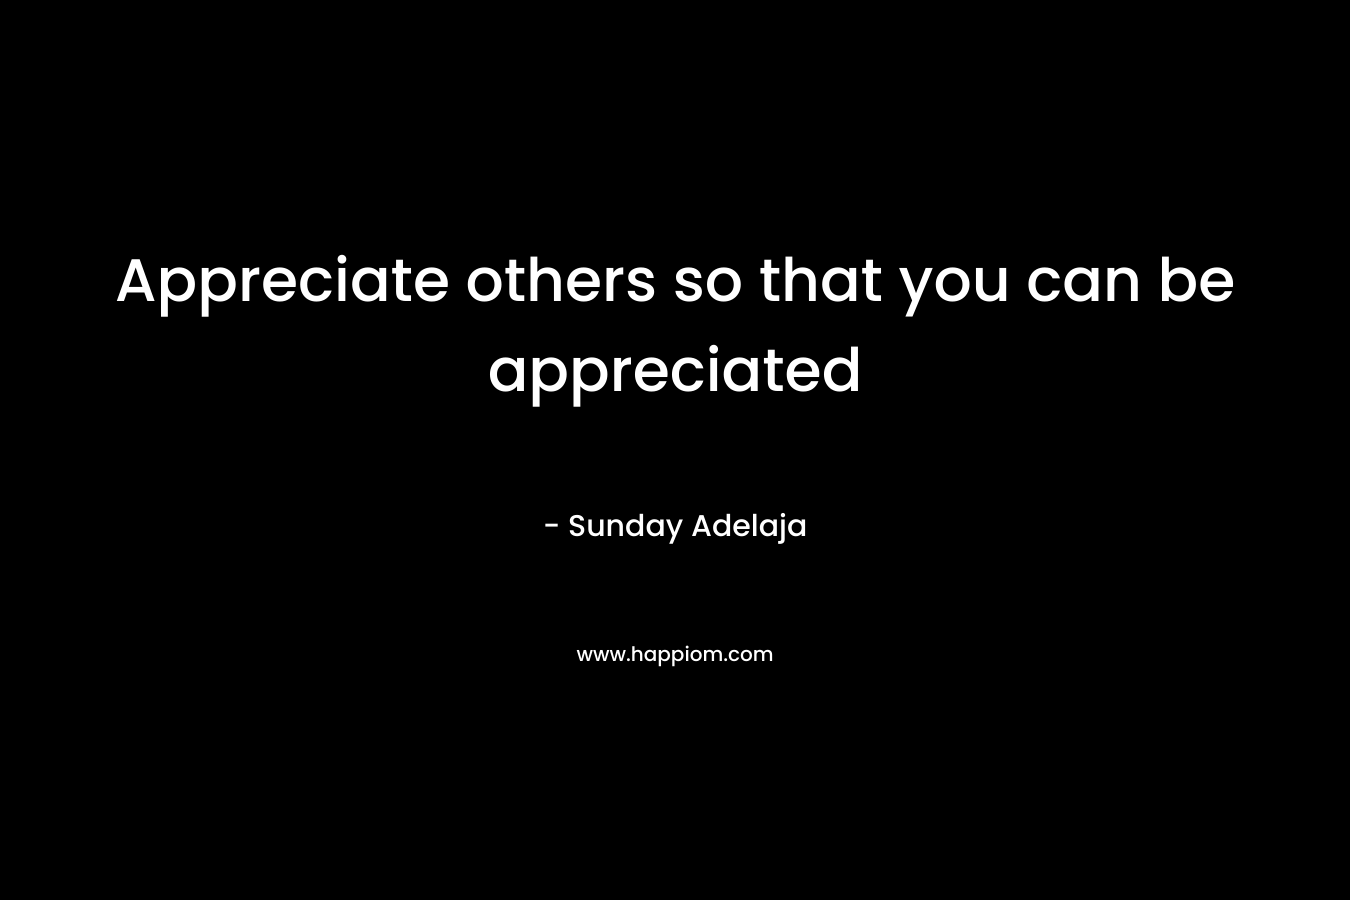 Appreciate others so that you can be appreciated